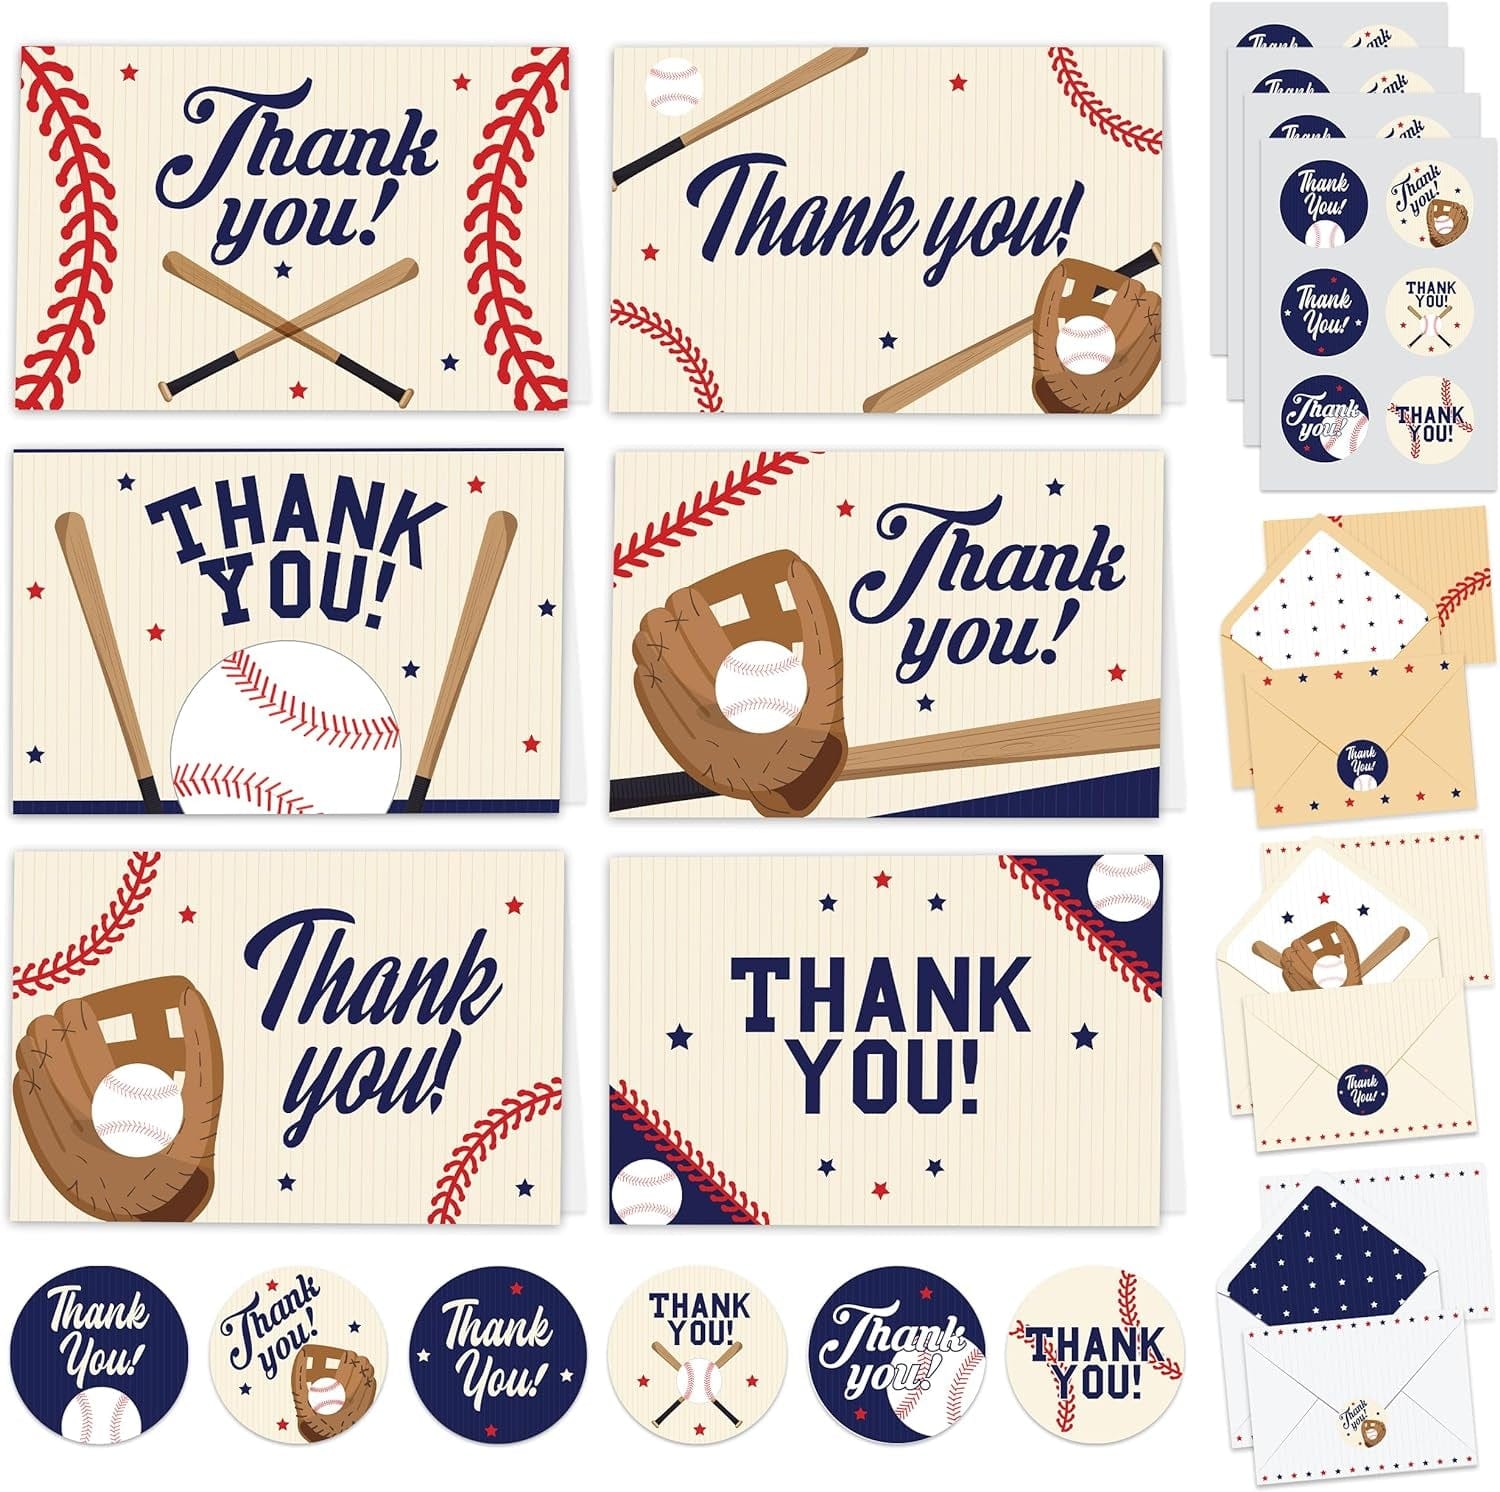 GeckoCustom Baseball Thank You Cards, 24Pcs Greeting Card with 6 Designs, Blank Inside, 6X4 Inch, Matching Envelopes & Stickers, Perfect for Birthday, Coach, Father'S Day, Kid Thank You Cards Baseball